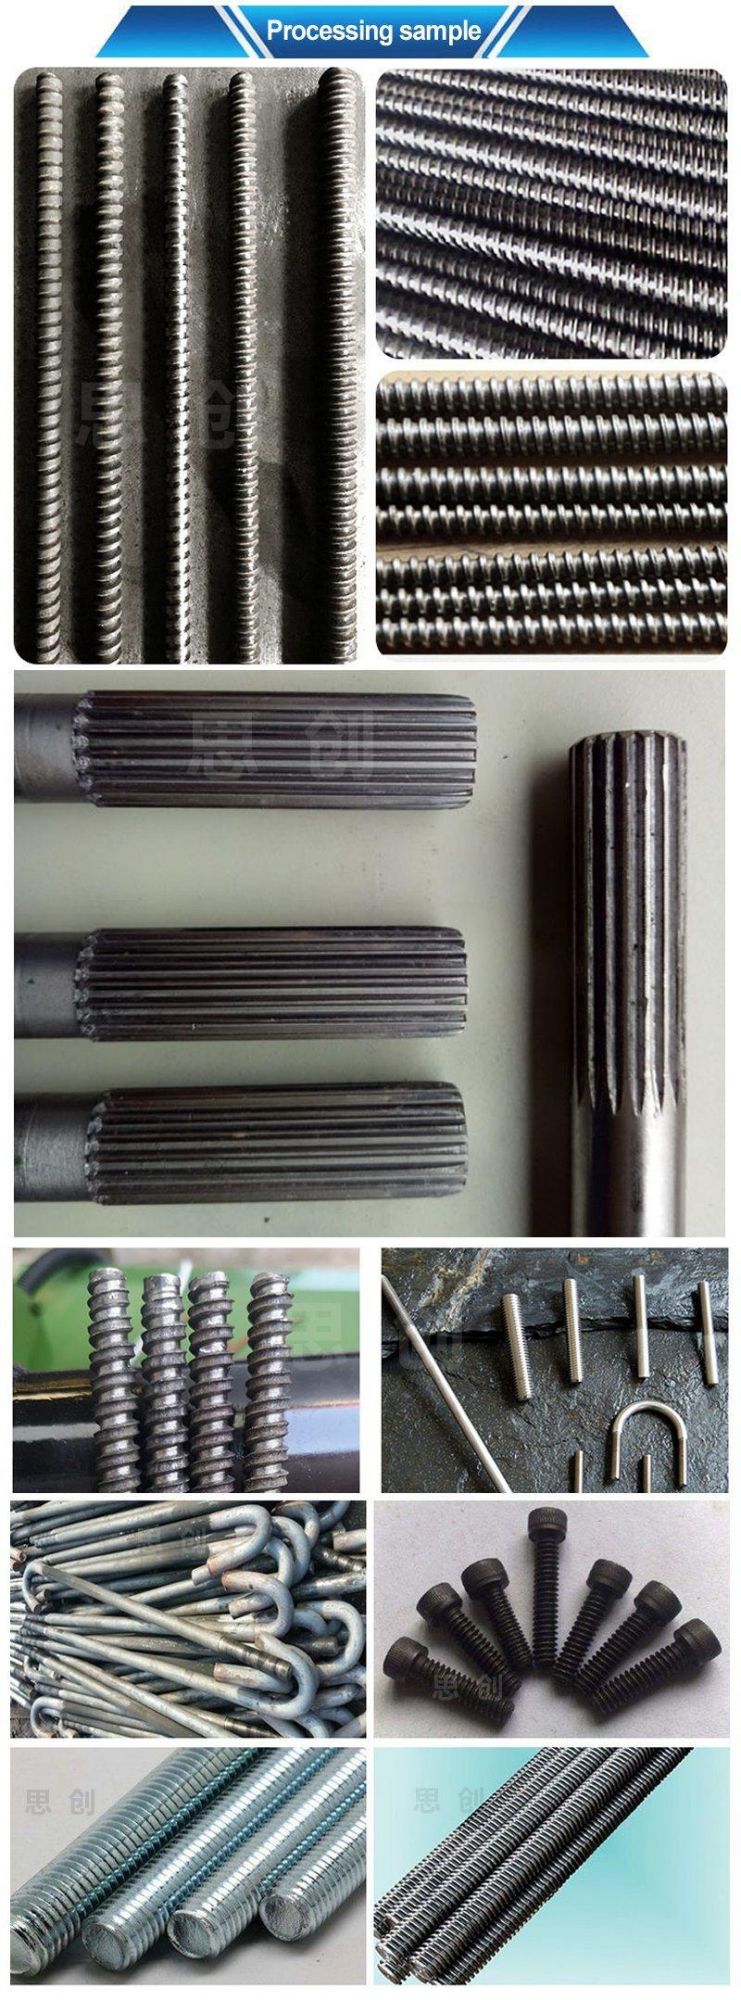 Fast Speed Bicycle Spoke Thread Rolling Machine CNC Steel Straight Thread Rolling Machine